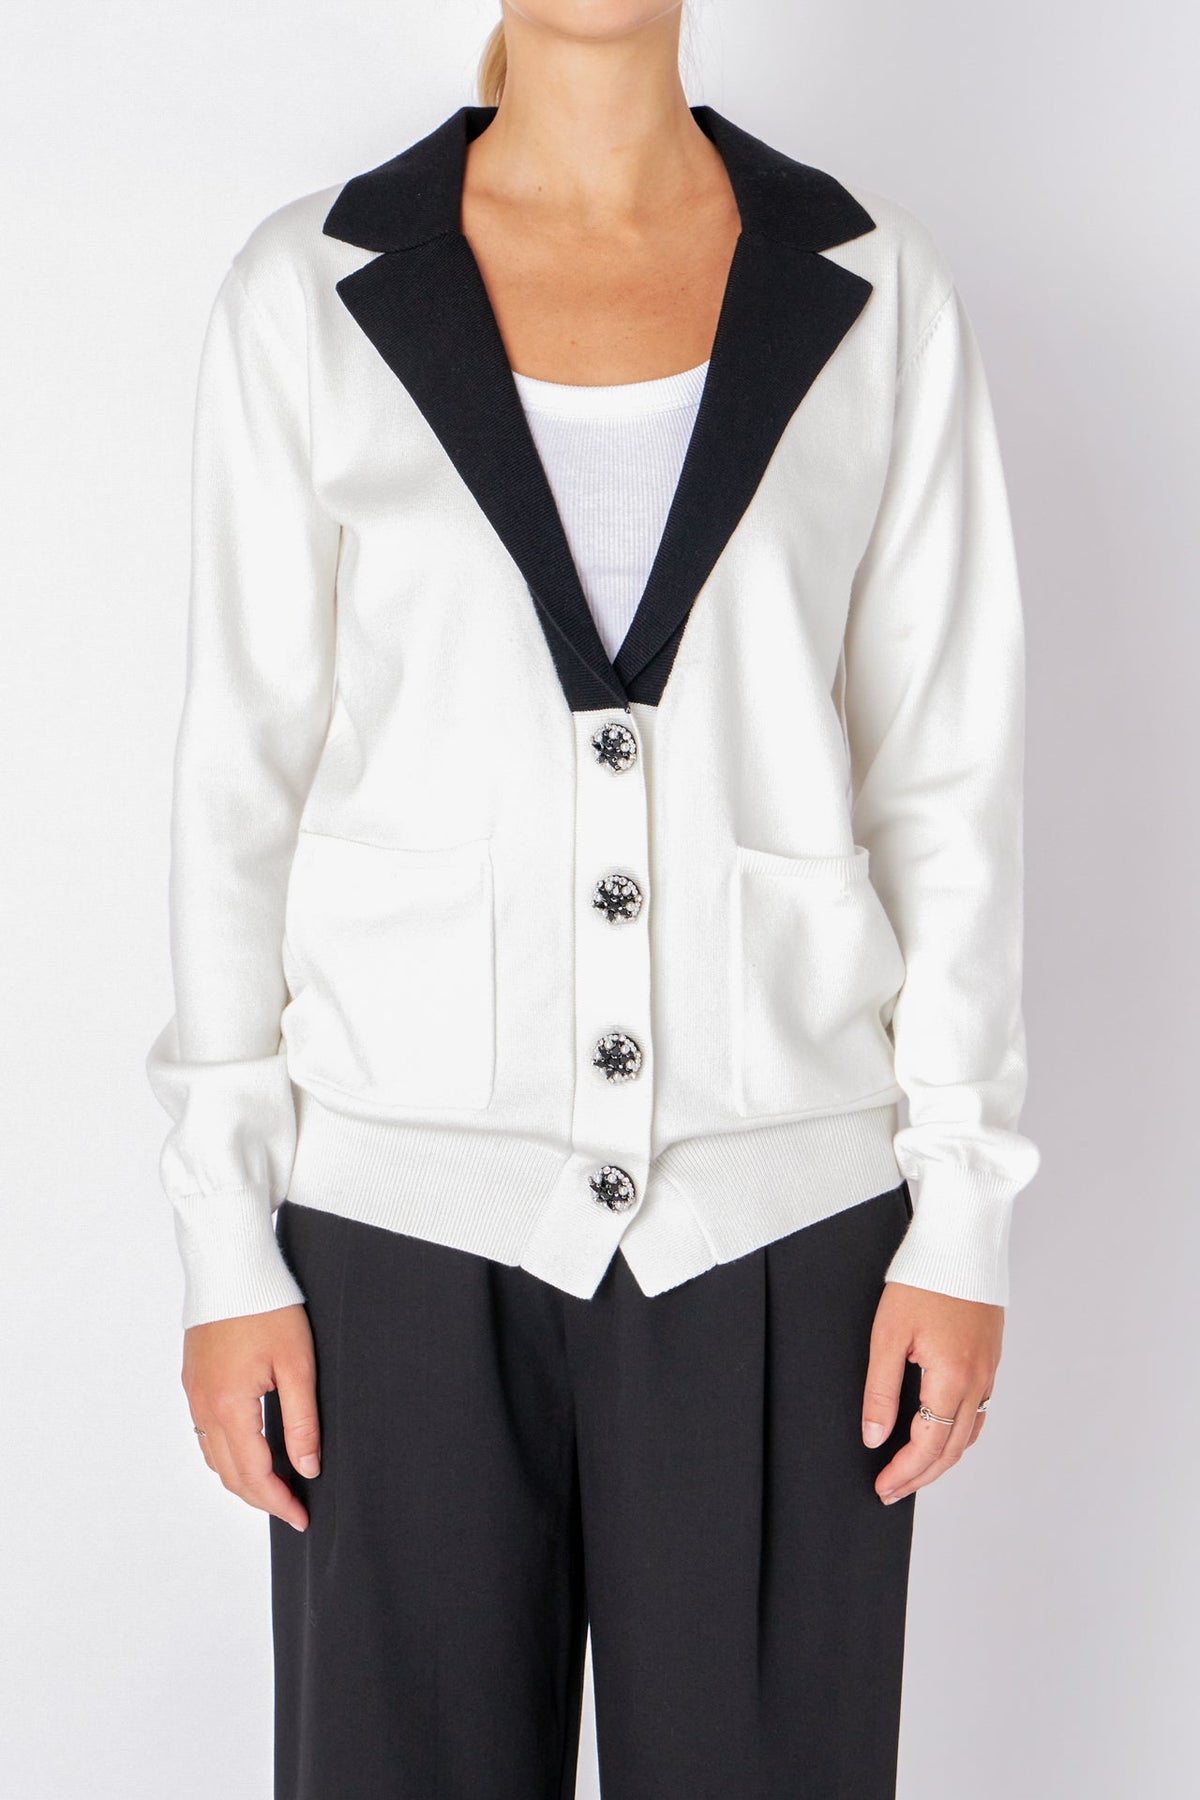 ENDLESS ROSE - Jewel Knit Blazer Cardigan - SWEATERS & KNITS available at Objectrare